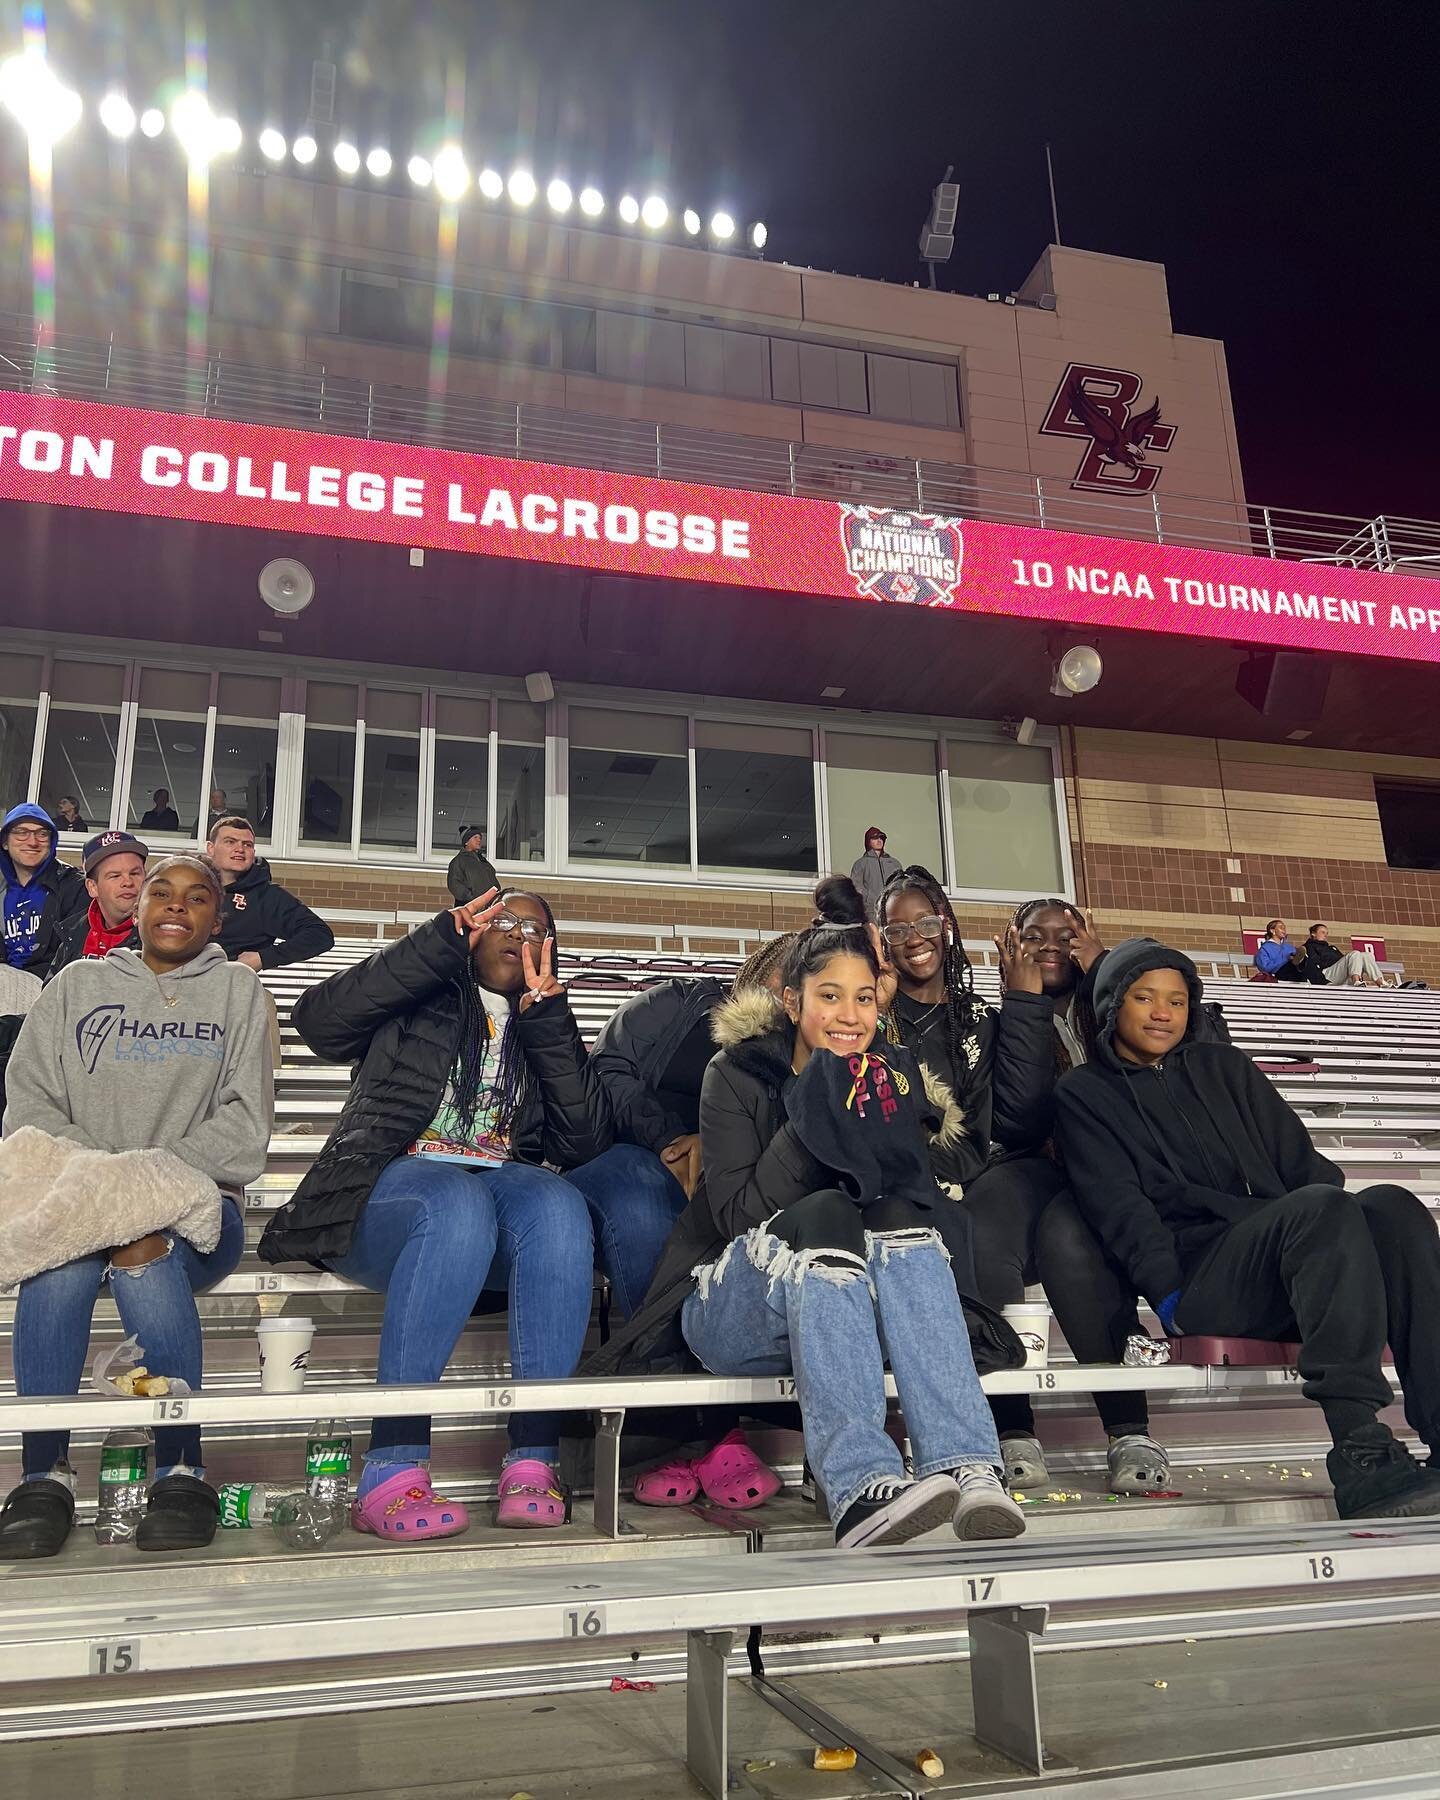 We had an amazing time at the Boston College vs. Dartmouth game last night!! Not only did we experience high level lacrosse, the game was dedicated to @morgansmessage the incredible organization working to eliminate the stigma surrounding mental heal